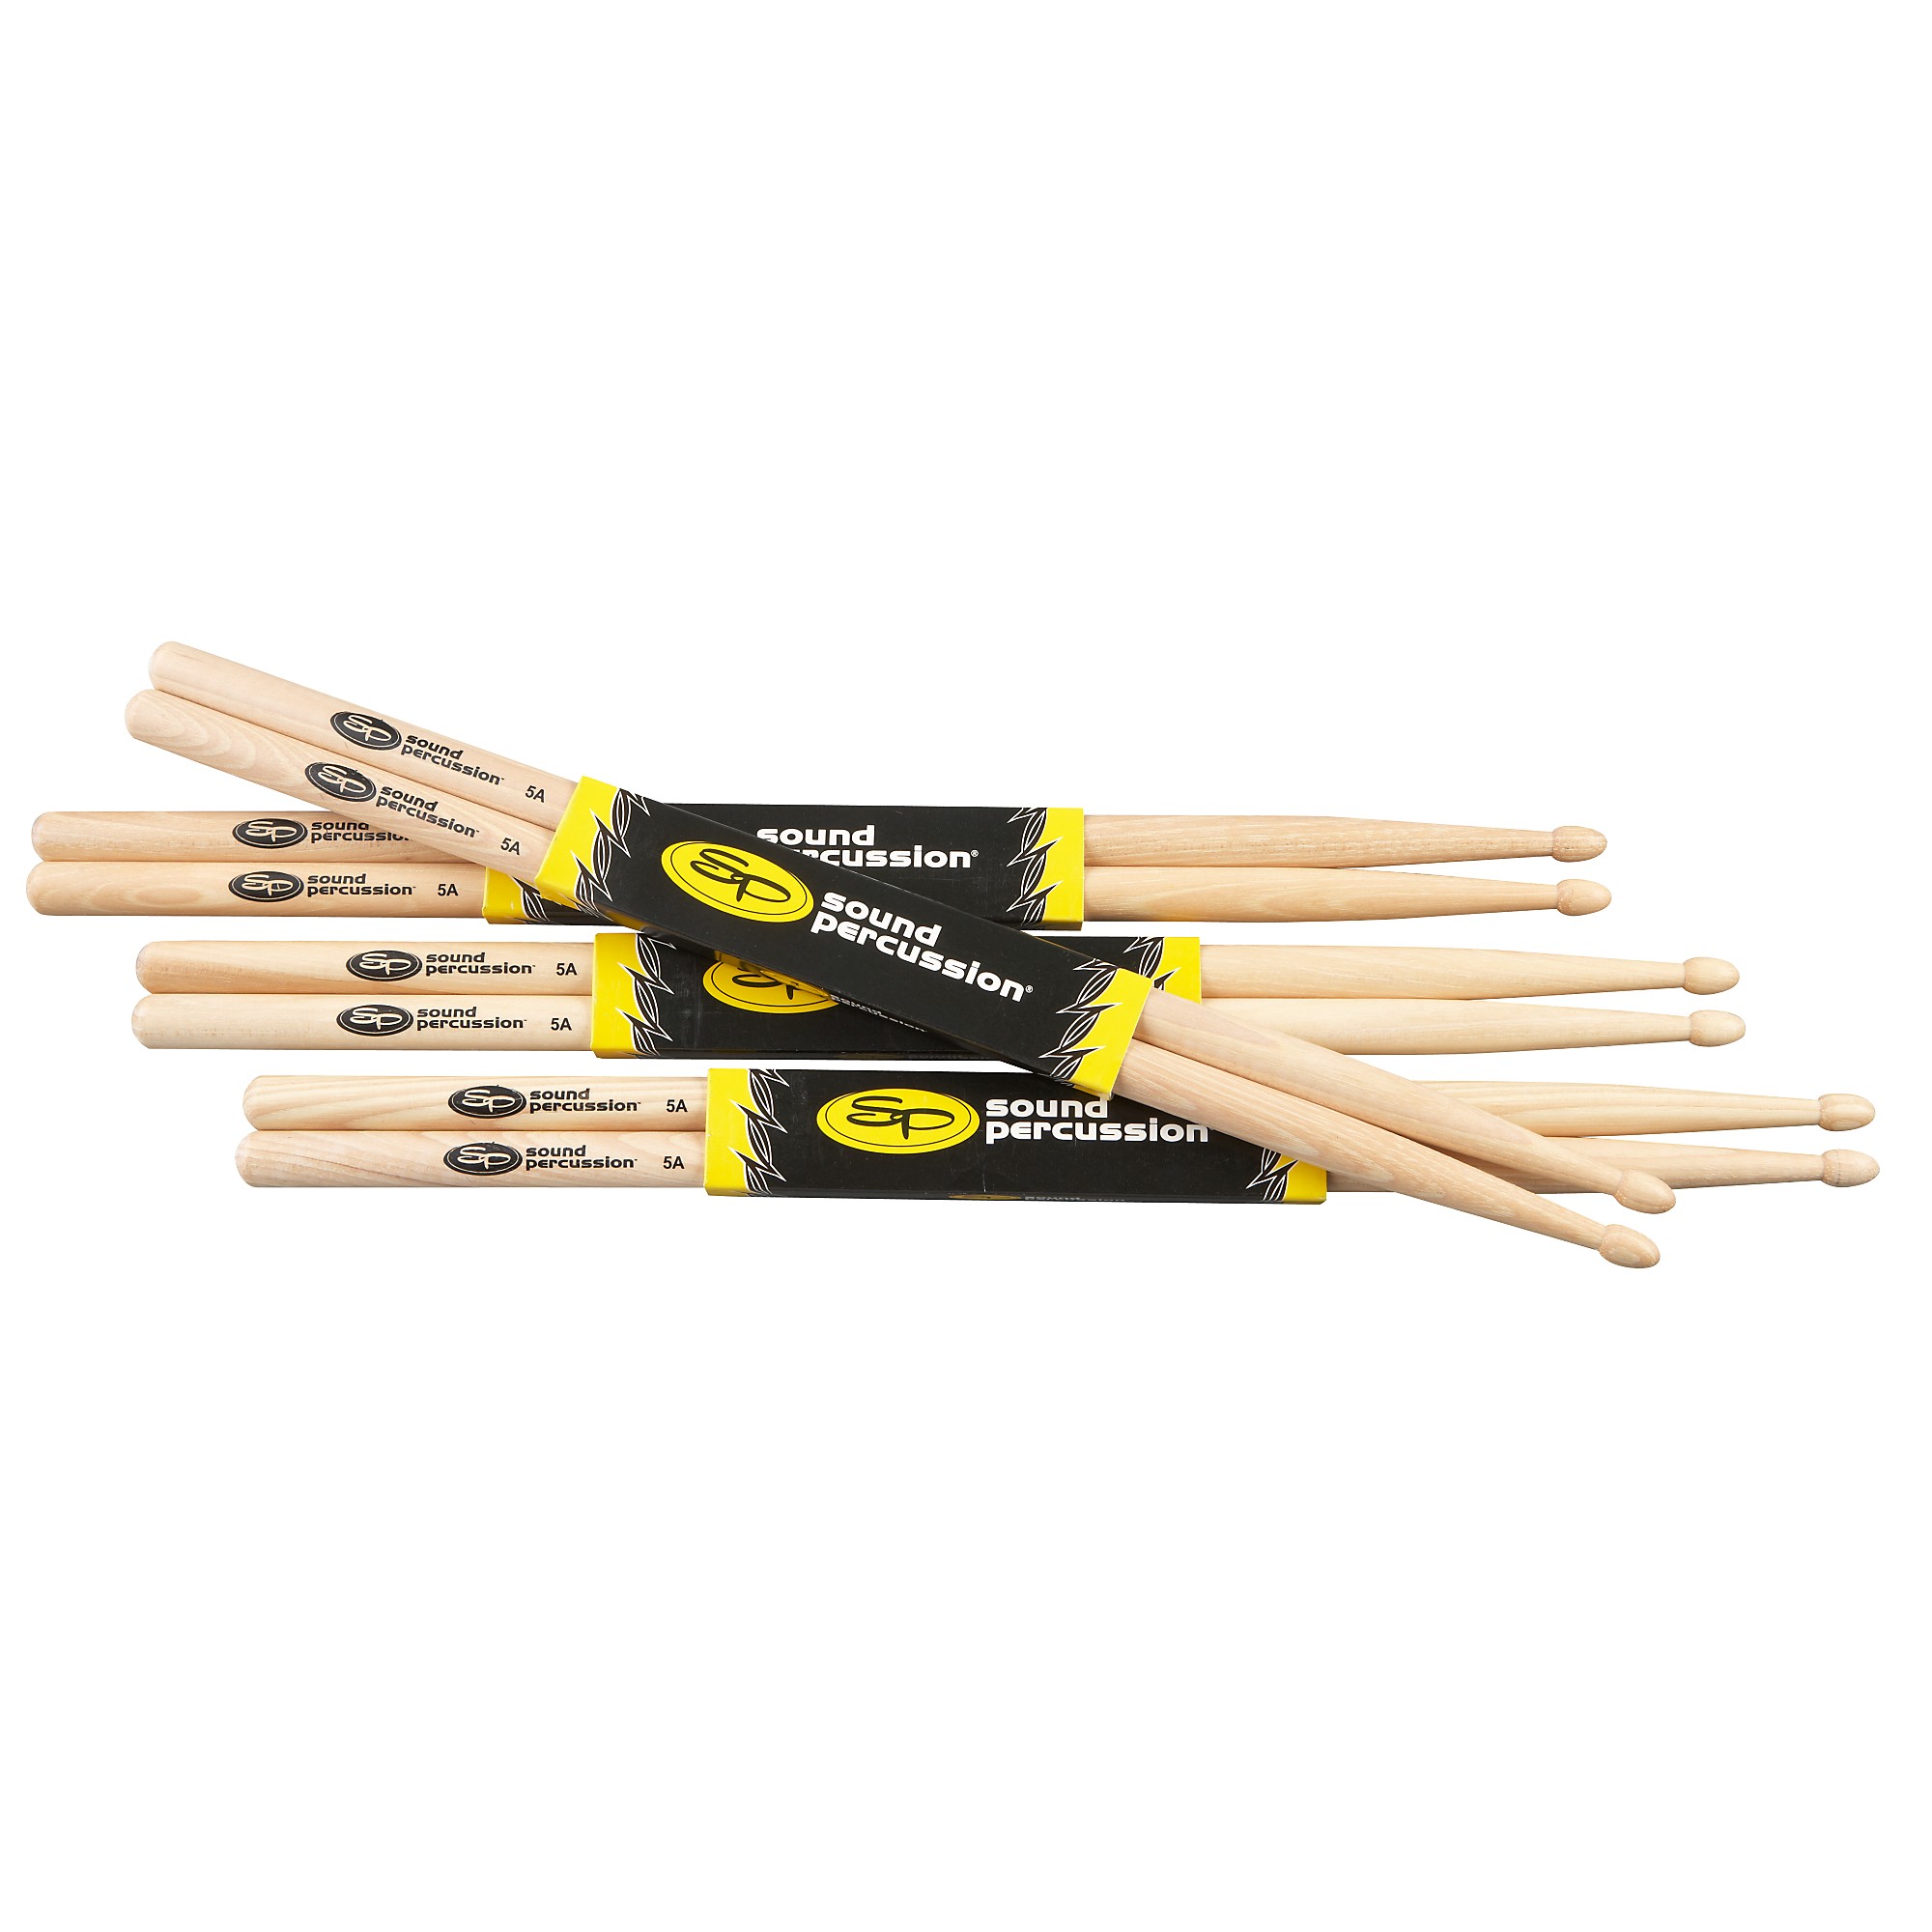 Drum Sticks Set for Acoustic Drums or Electronic Drums LA Specials Drum Sticks 3 Pairs Hickory Drumsticks Oval Nylon Tip 7A Drumsticks Consistent Weight and Pitch 